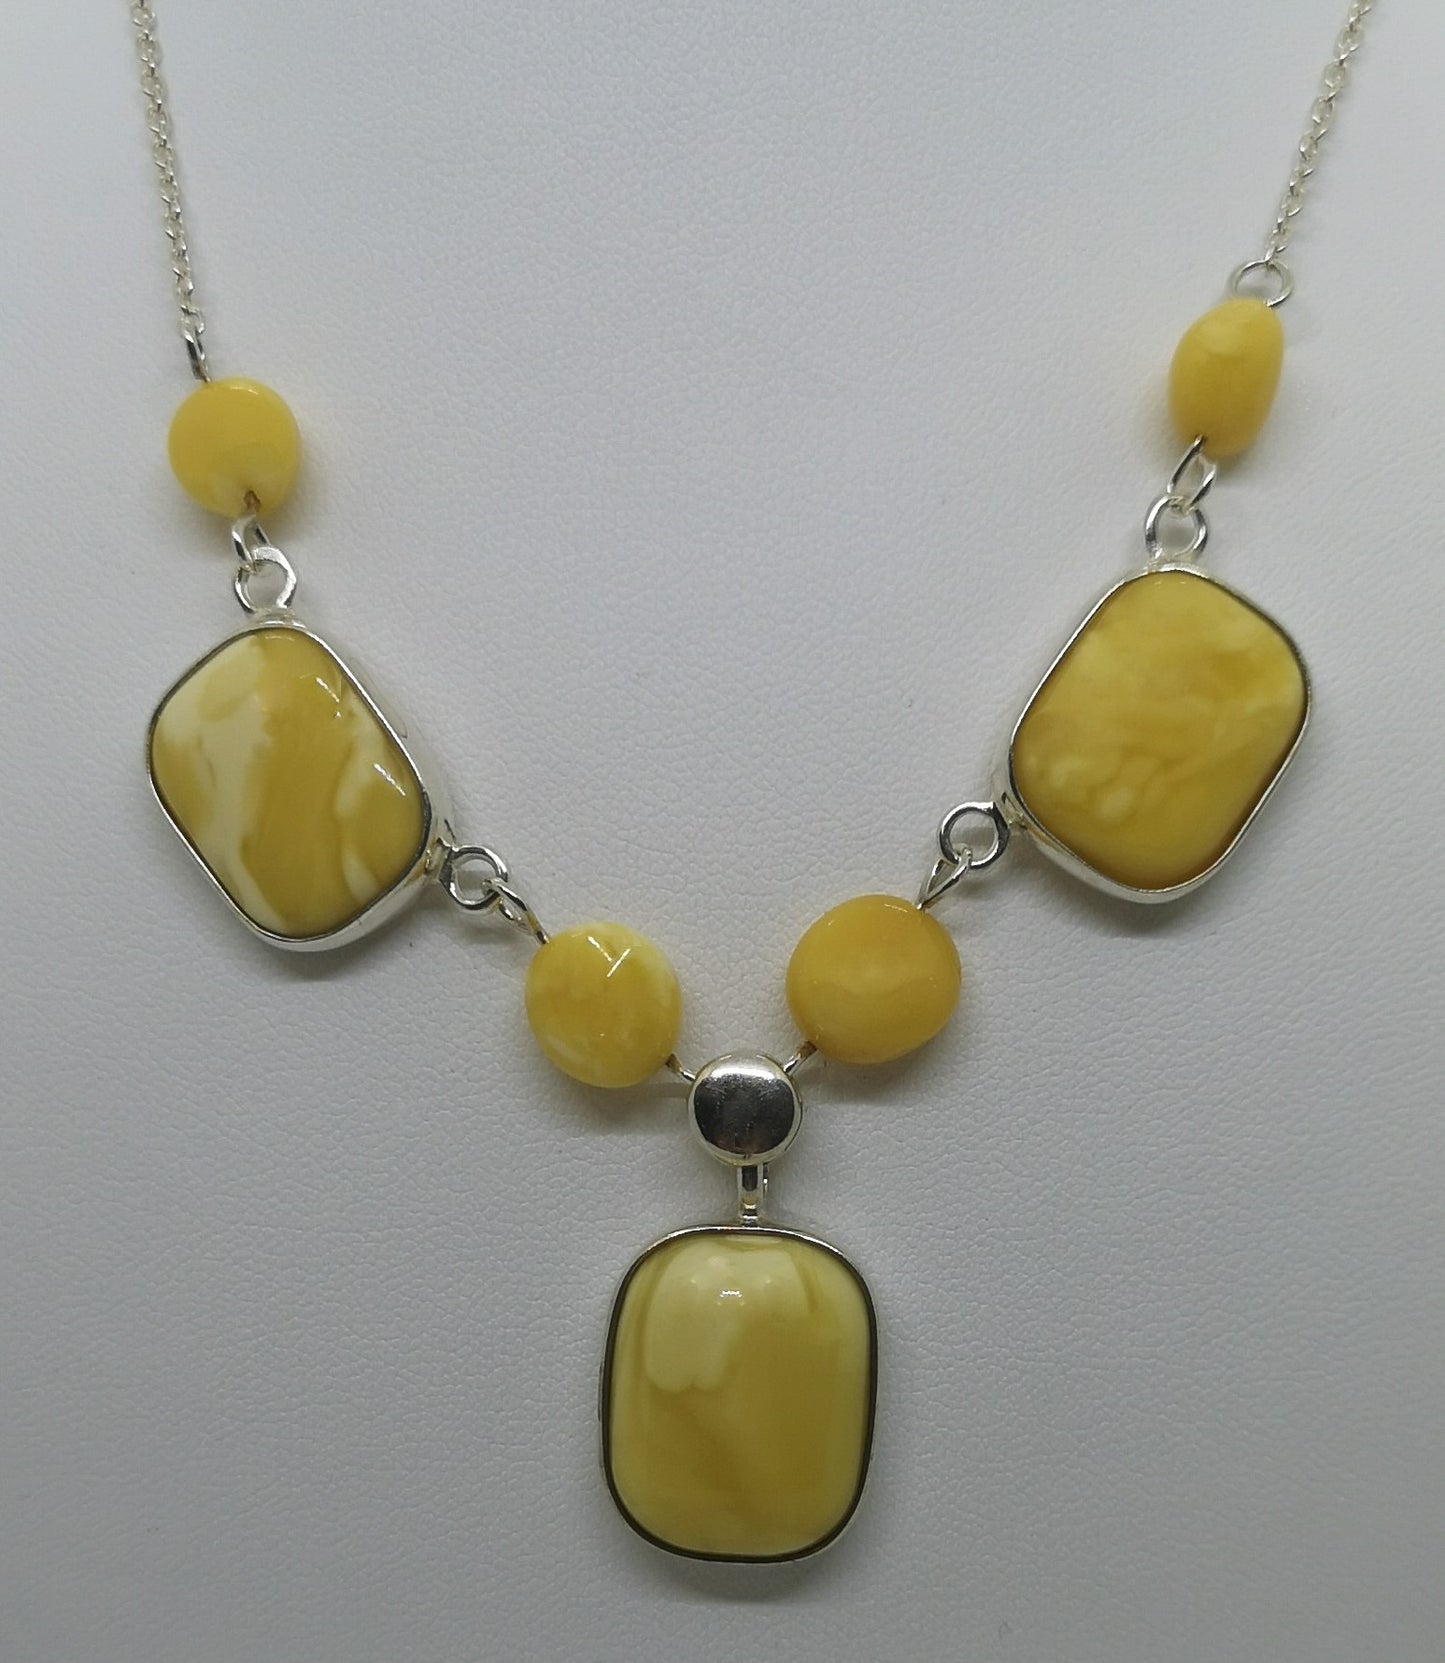 Sterling silver chain with 7 butterscotch amber stones either set in a setting or with a wire through it